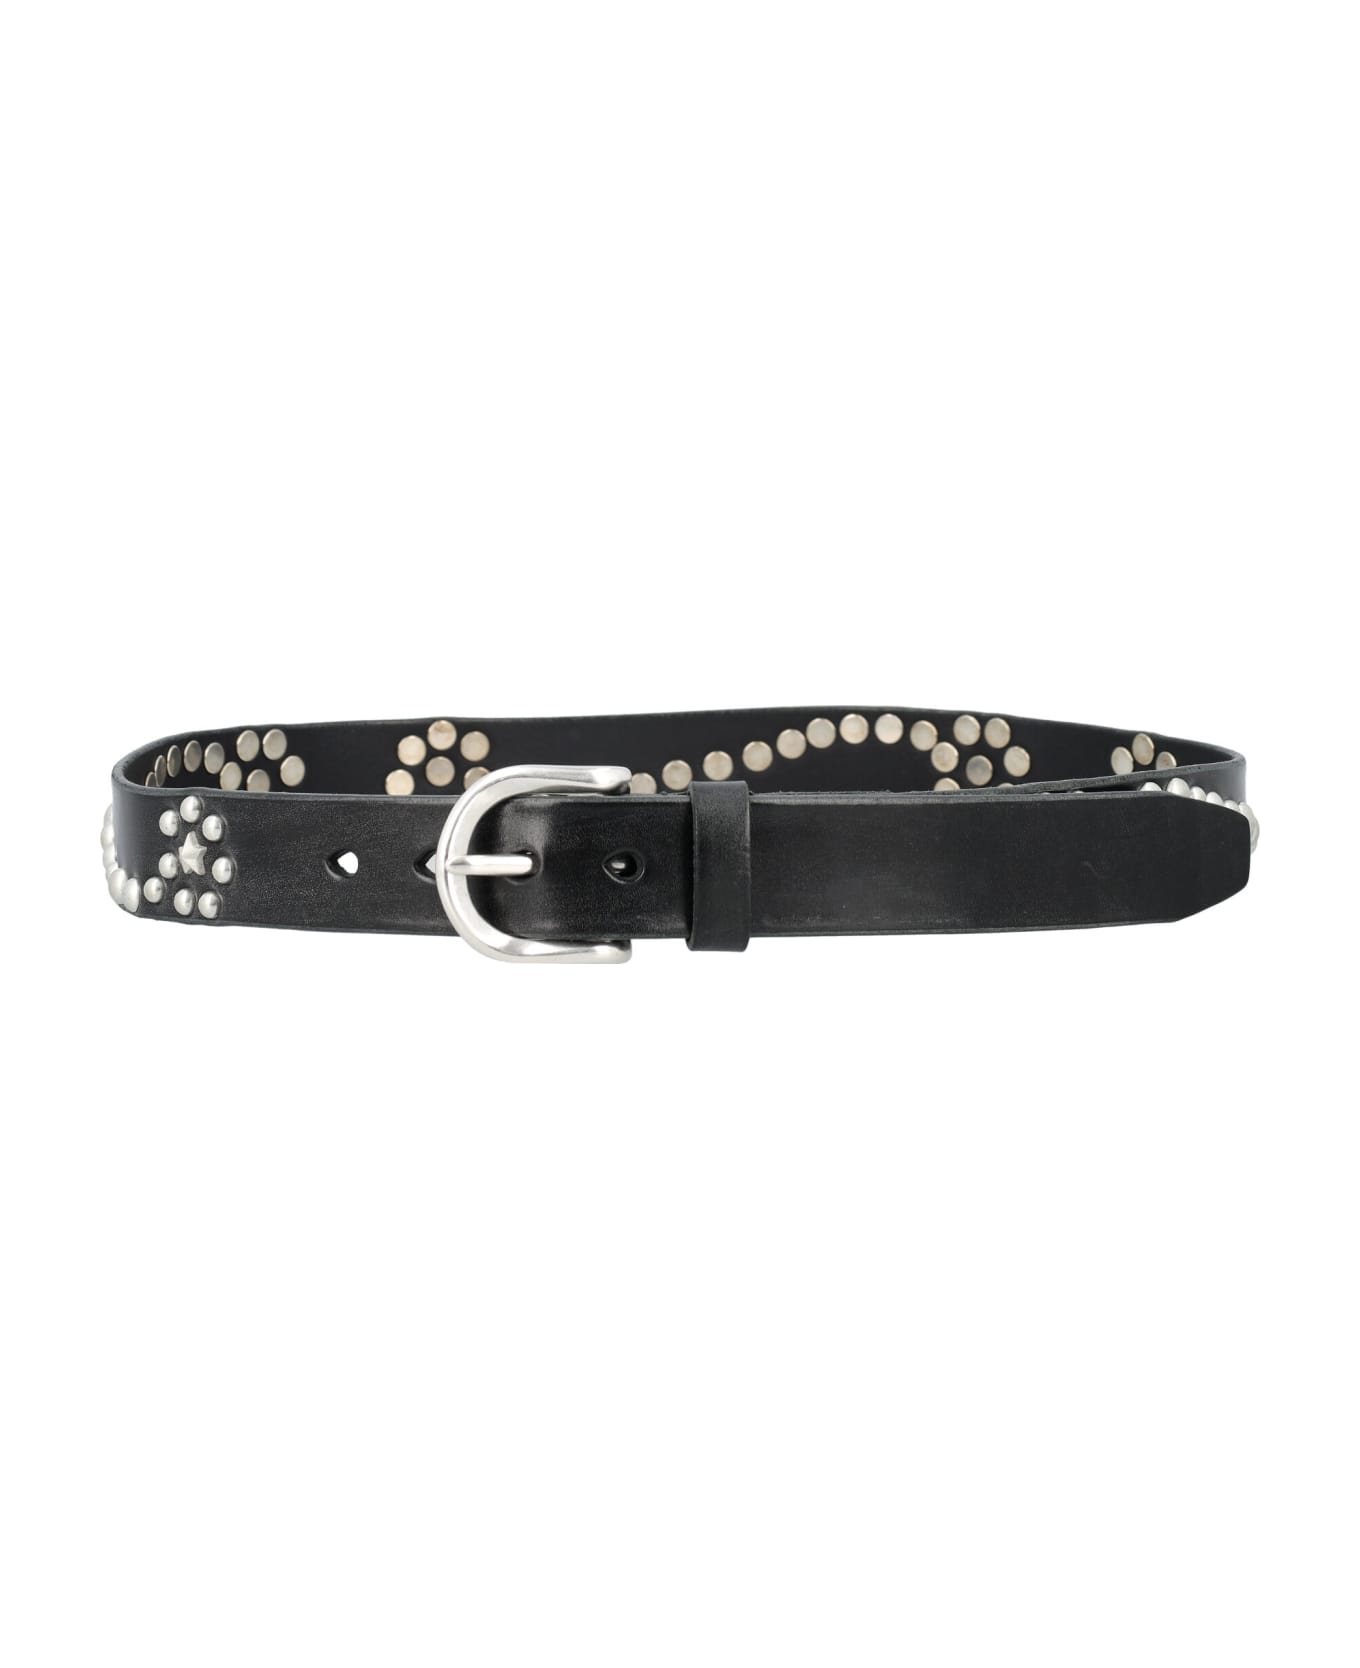 Our Legacy Star Fall Belt - BLACK BRIDLE